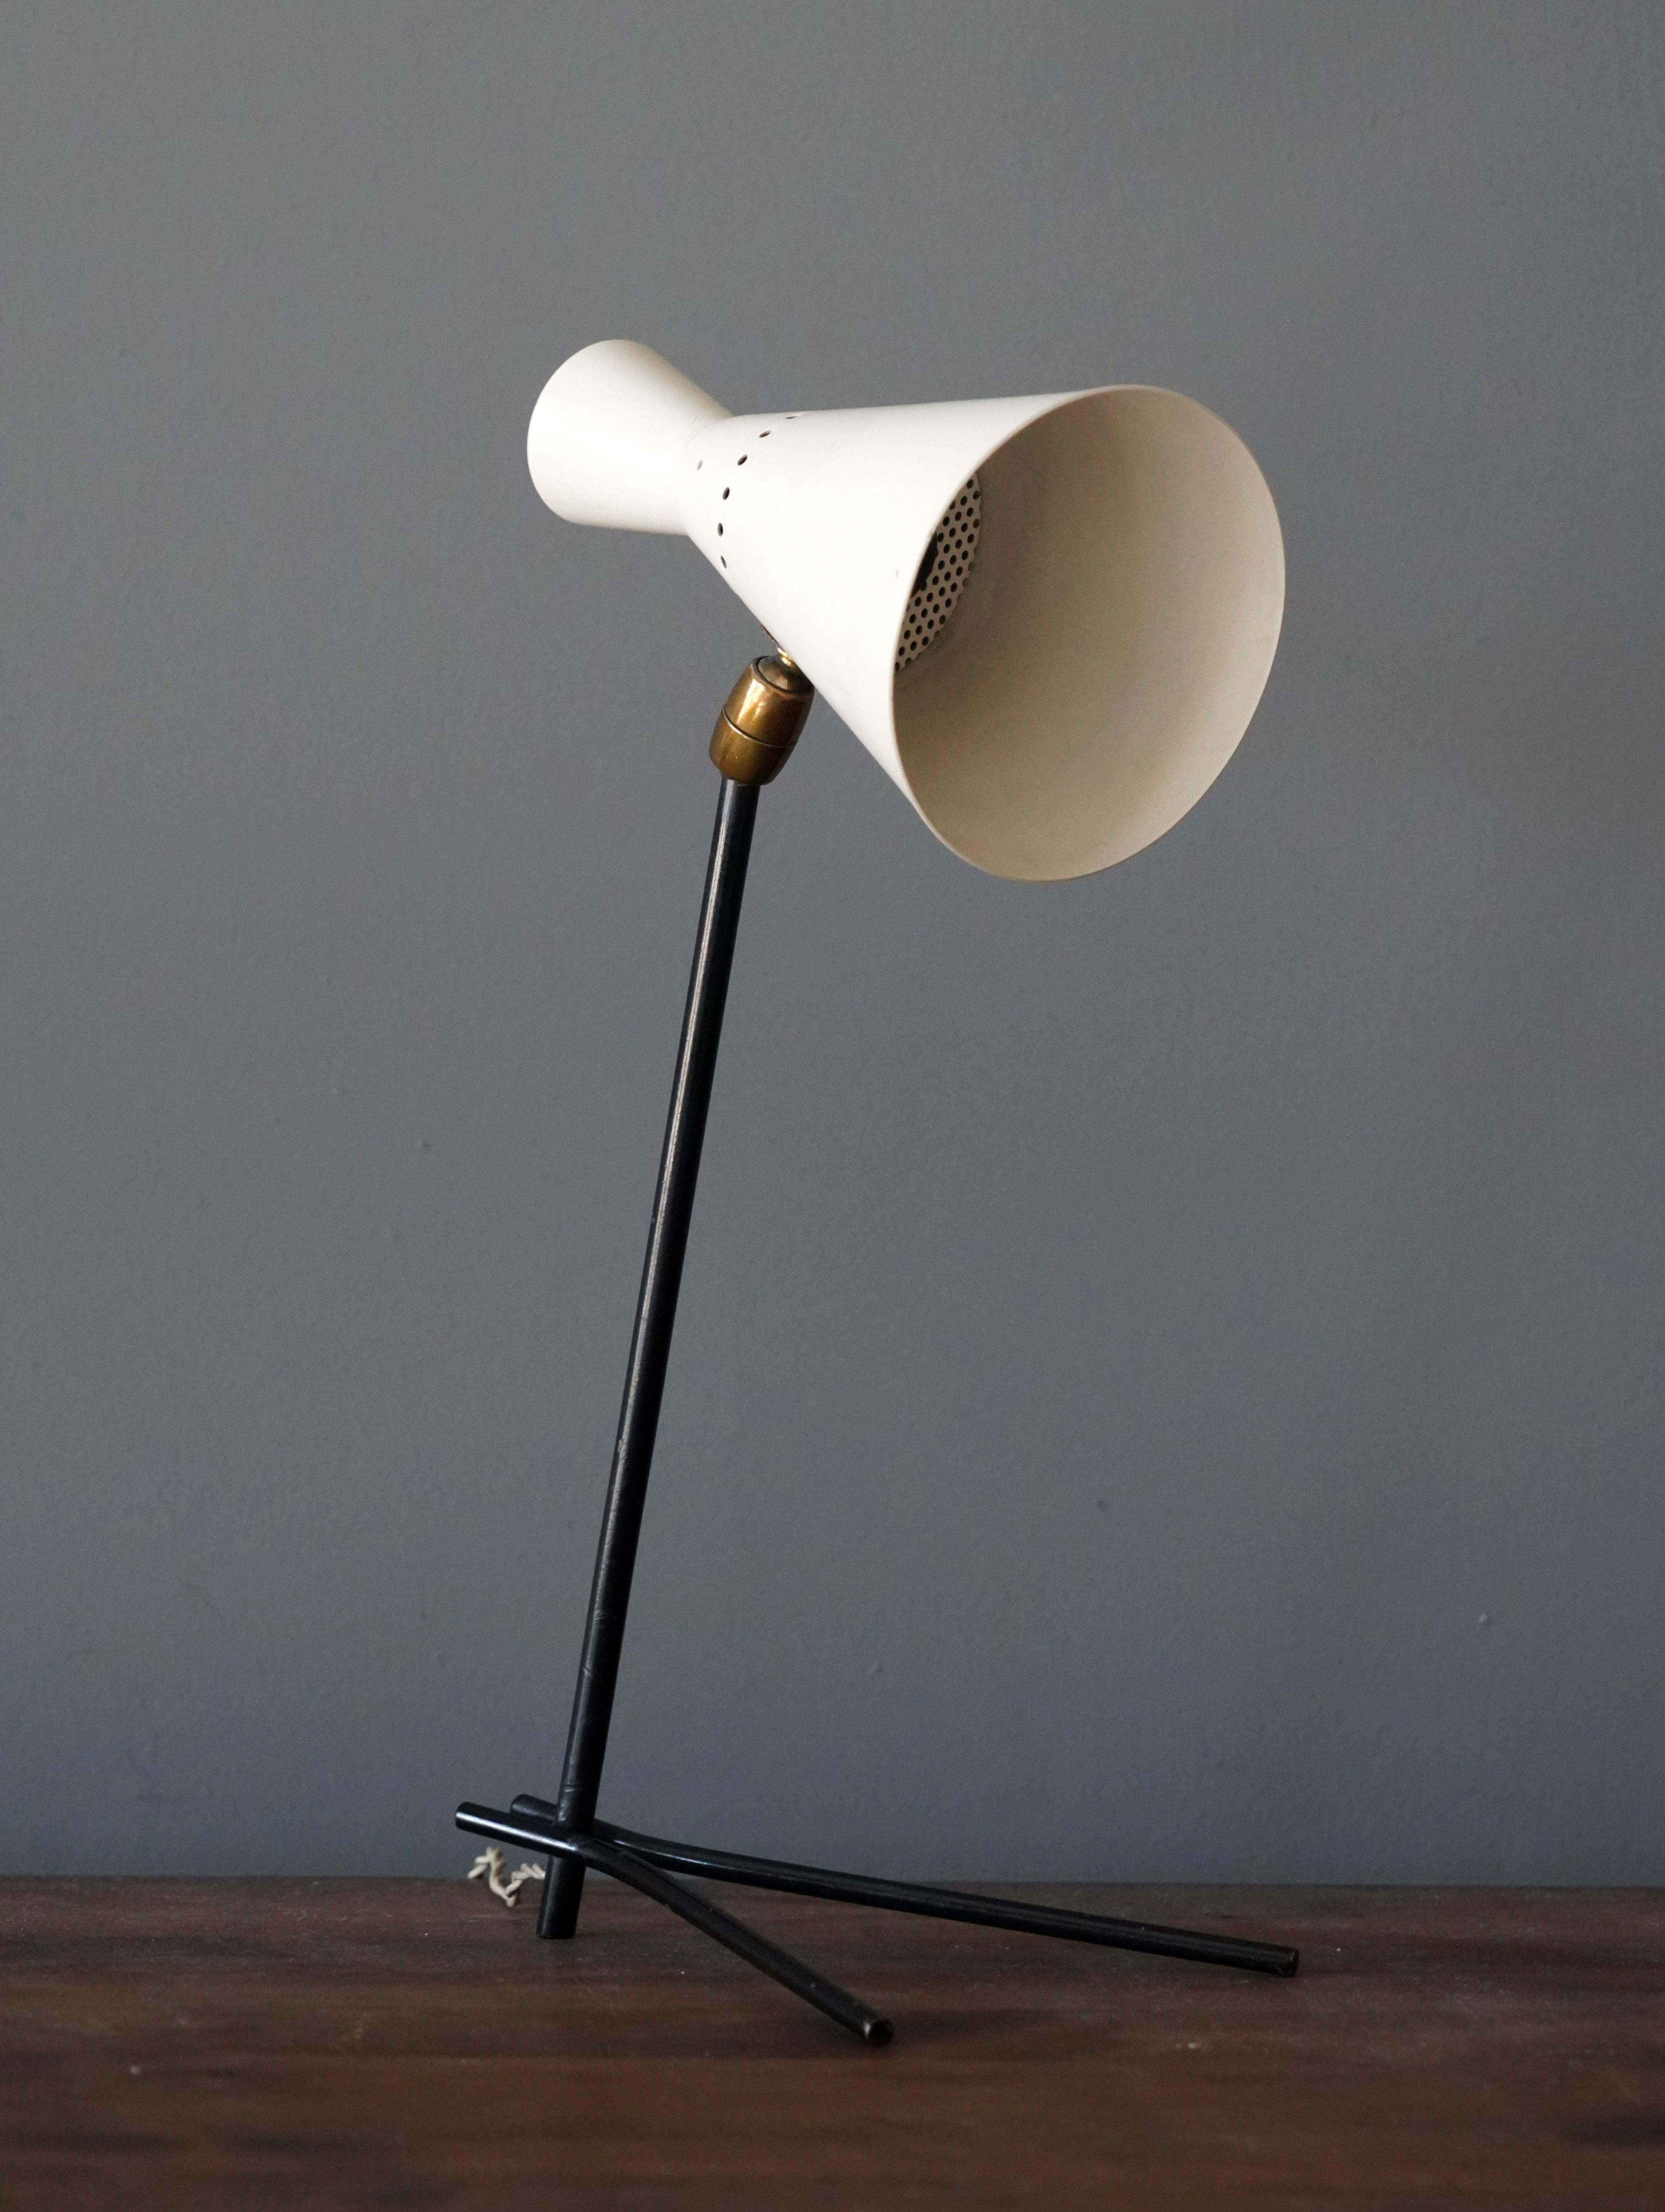 An adjustable desk light / table lamp. Designed and produced by Gilardi & Barzaghi in 1957.

Literature: Domus n. 333, August 1957, advertising page

Other designers and makers of the period include Gino Sarfatti, Max Ingrand, Angelo Lelii,